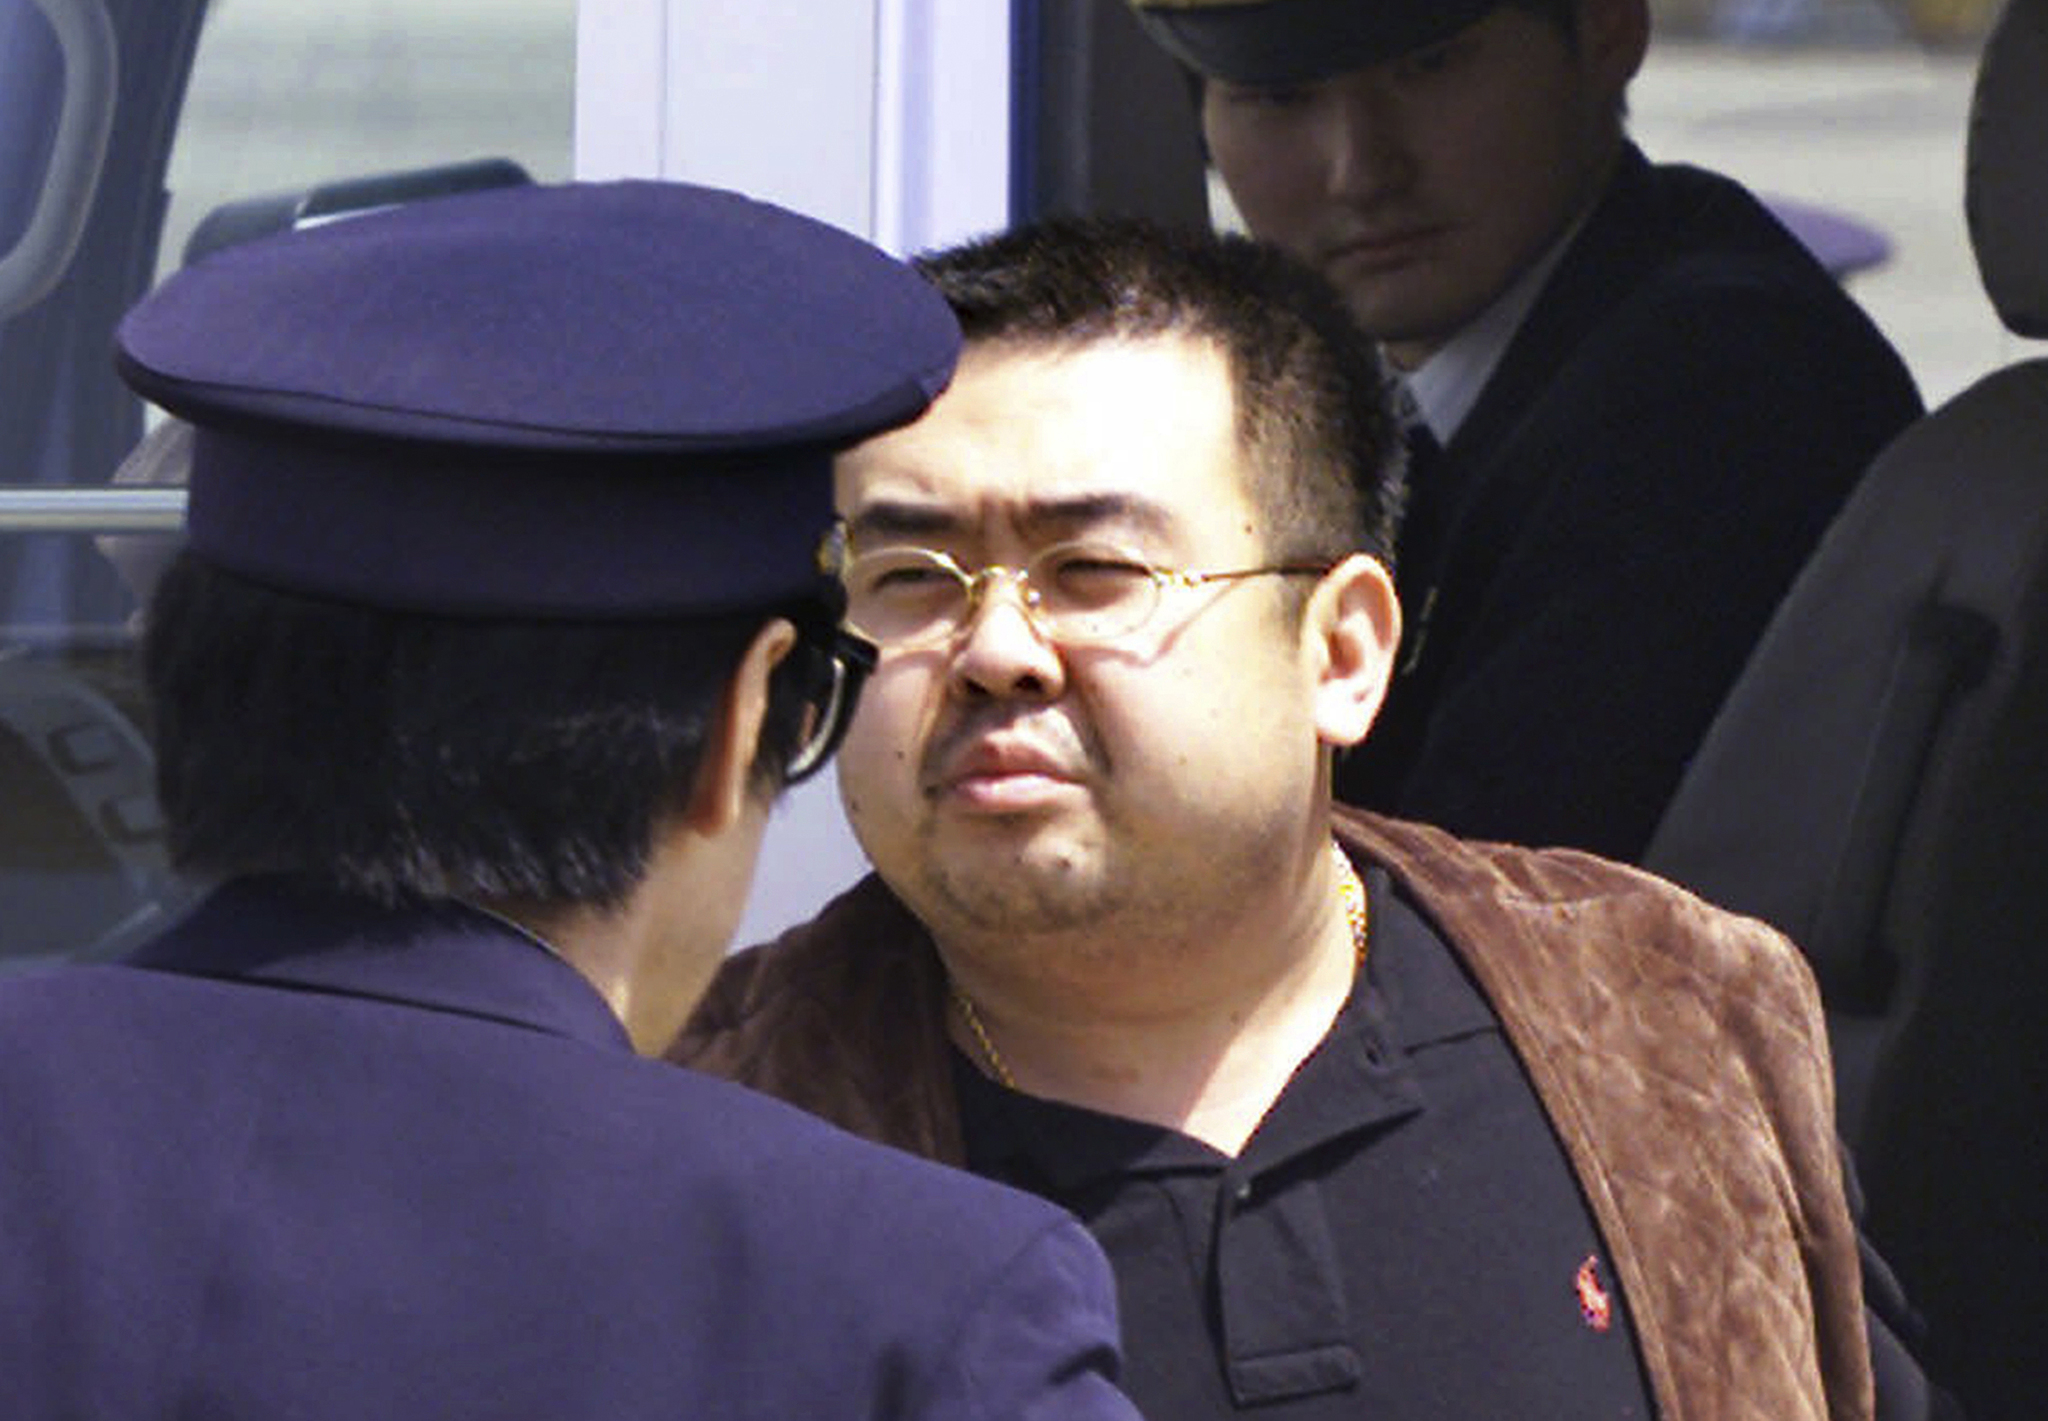 This May 4, 2001 photo shows Kim Jong Nam, exiled half brother of North Korea’s leader Kim Jong Un, escorted by Japanese police officers at the airport in Narita, Japan. Kim was caught with his family trying to enter Japan using a fake passport. He told Japanese officials they were going to Disneyland and was quickly expelled, a major embarrassment for Kim Jong Il that seemingly ended any chance he could succeed his father. (Itsuo Inouye | The Associated Press File)